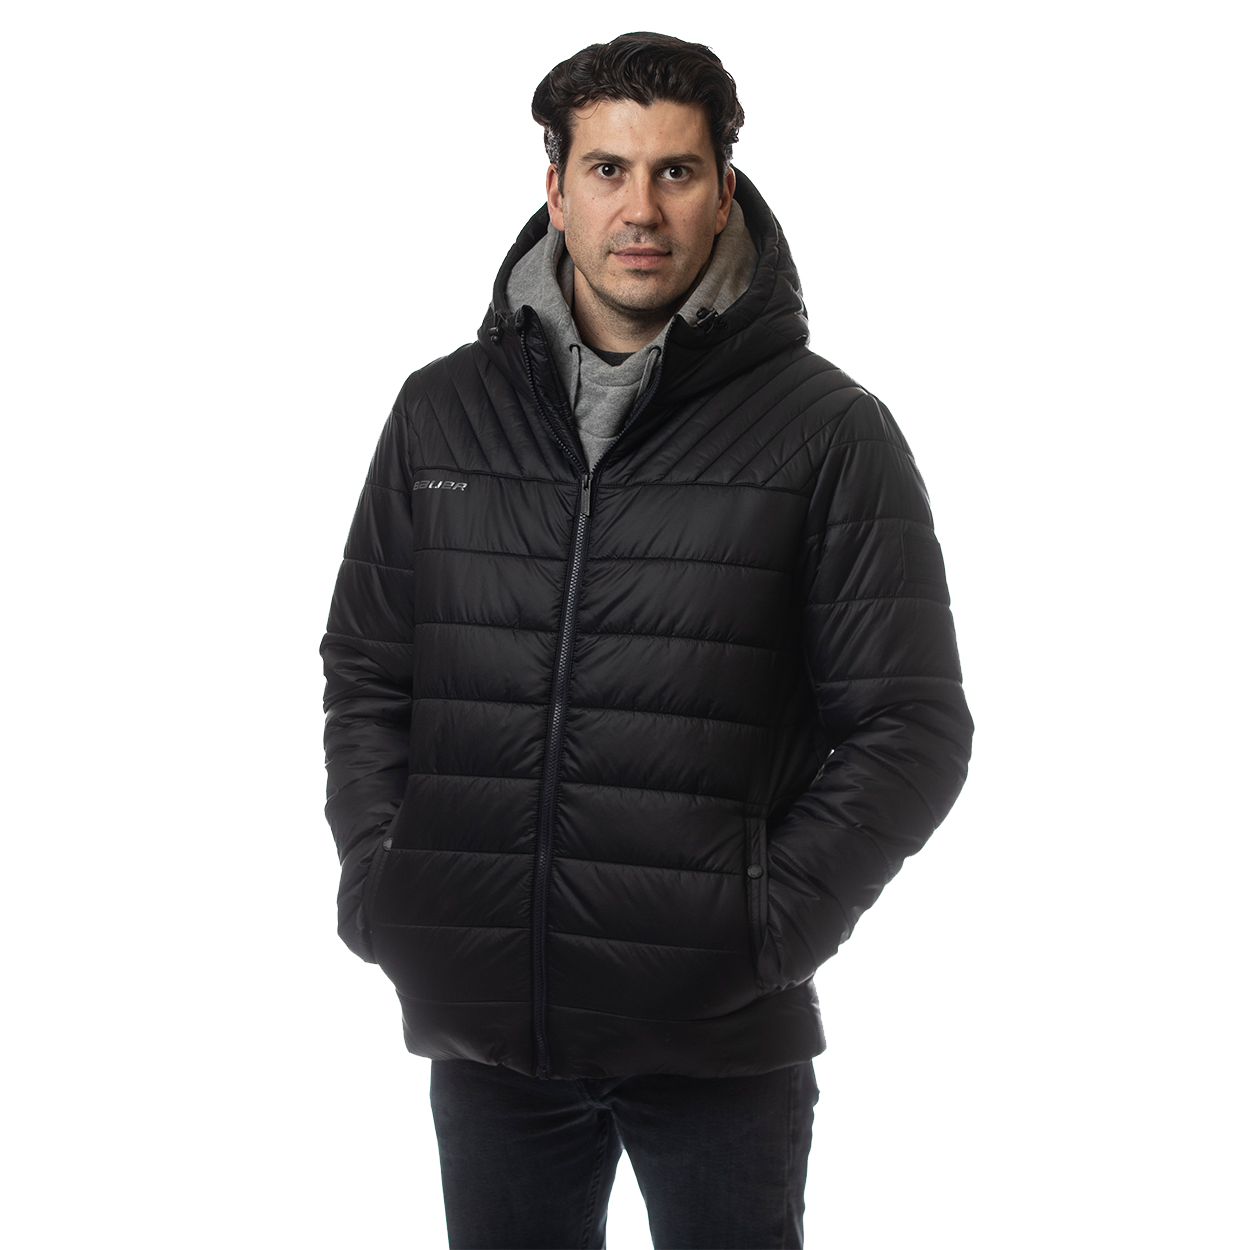 BAUER SUPREME HOODED PUFFER JACKET YOUTH